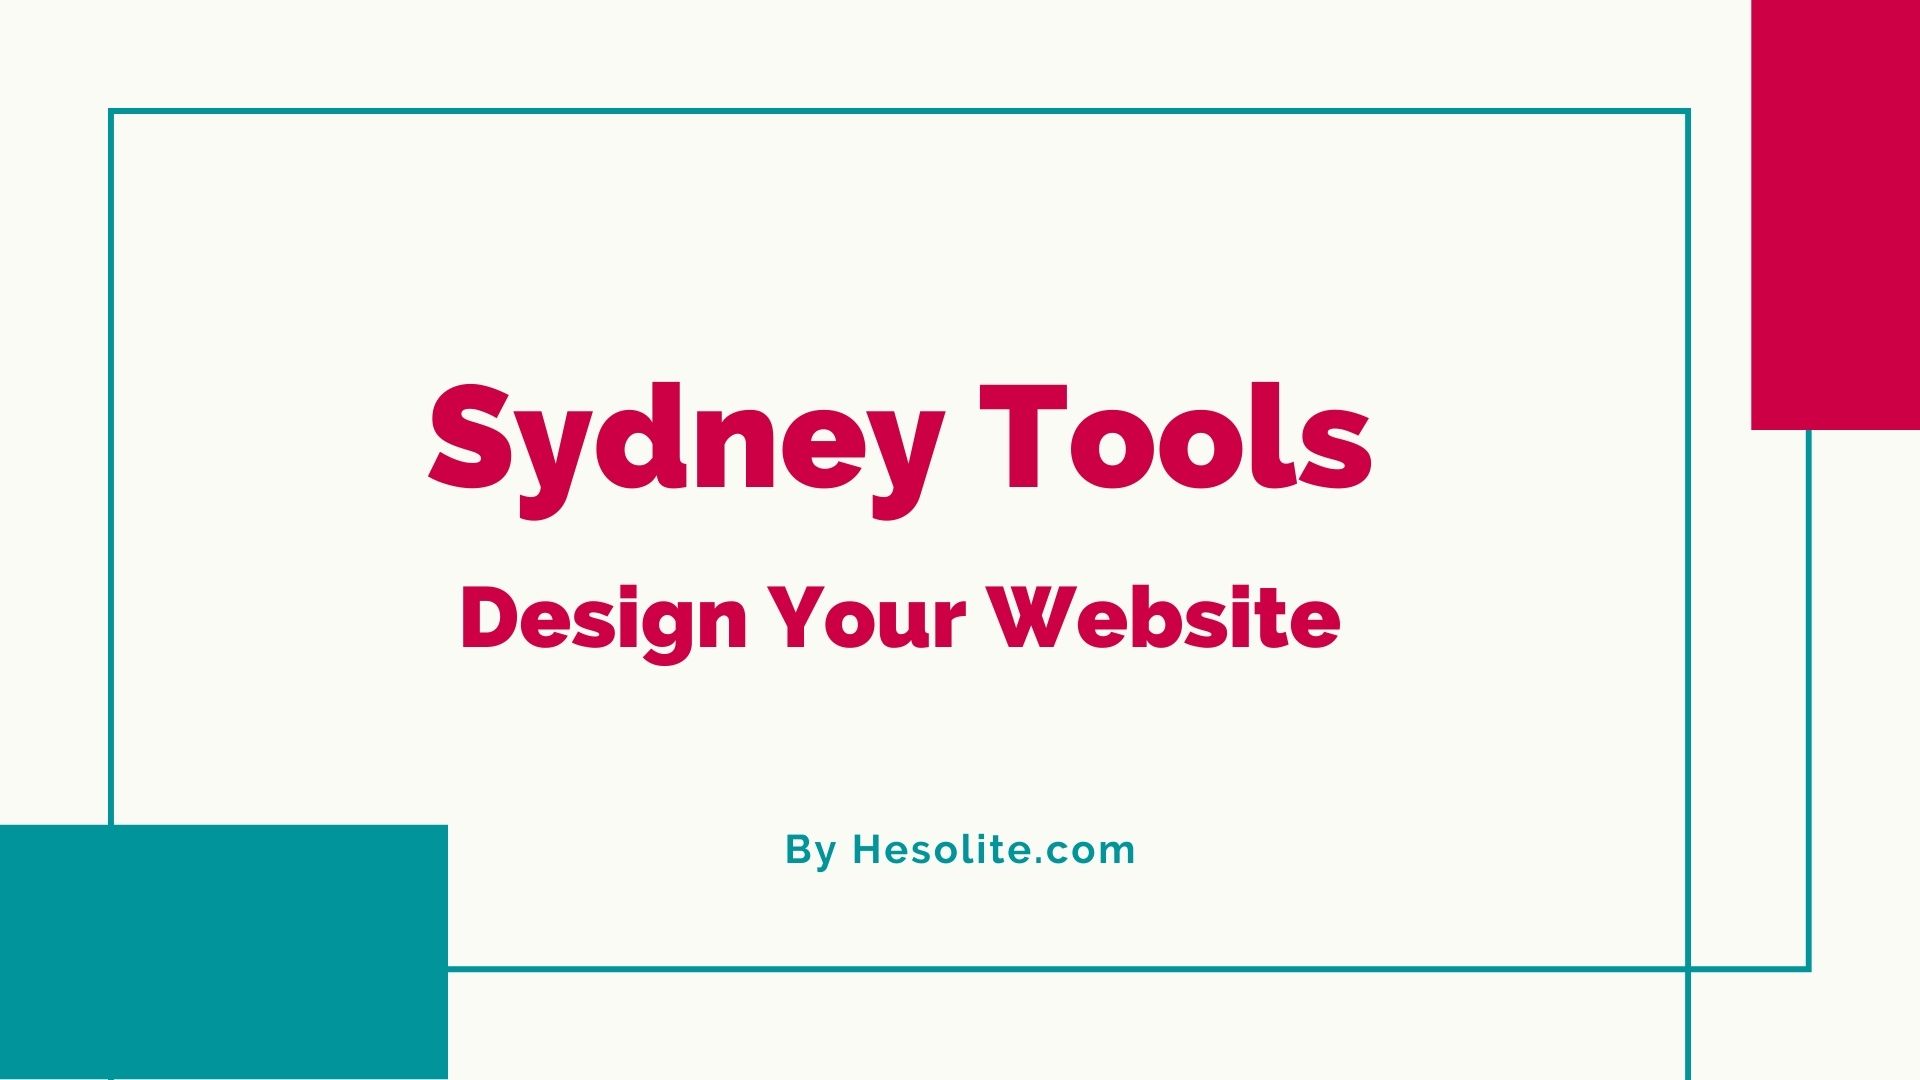 Why Choose Sydney Tools to Design Your Website?